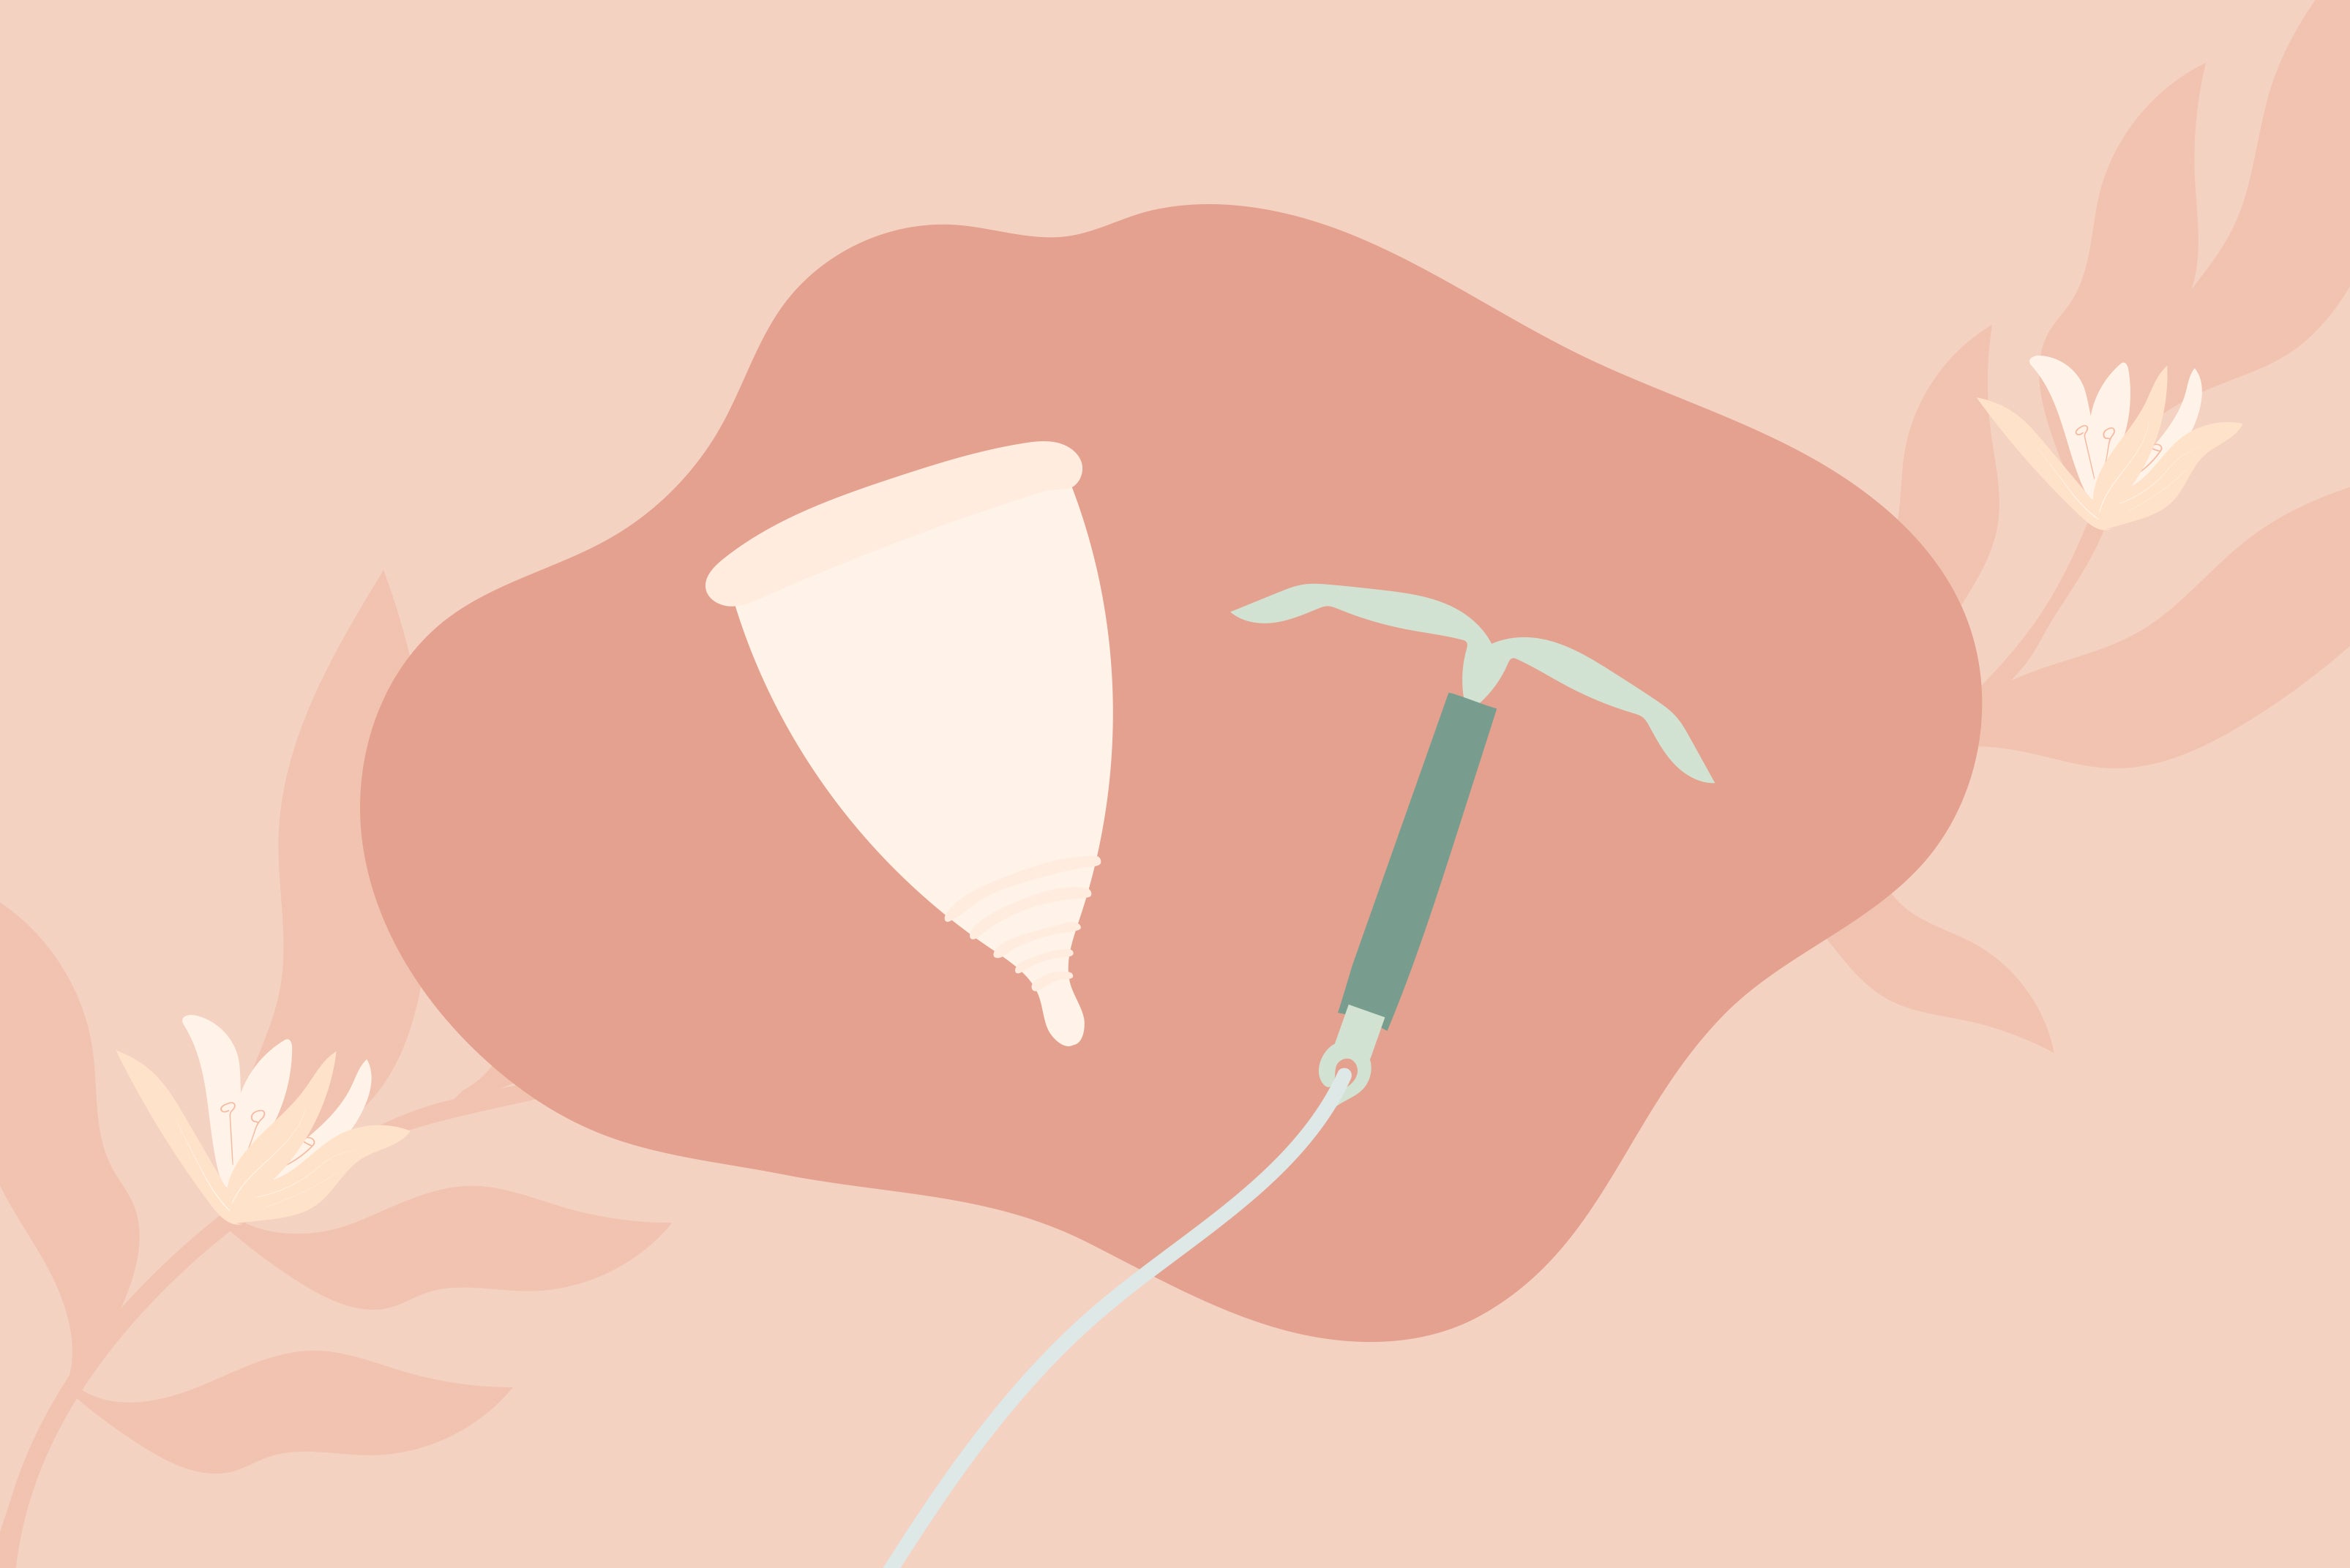 A  drawing of a menstrual cup and IUD against an orange background.